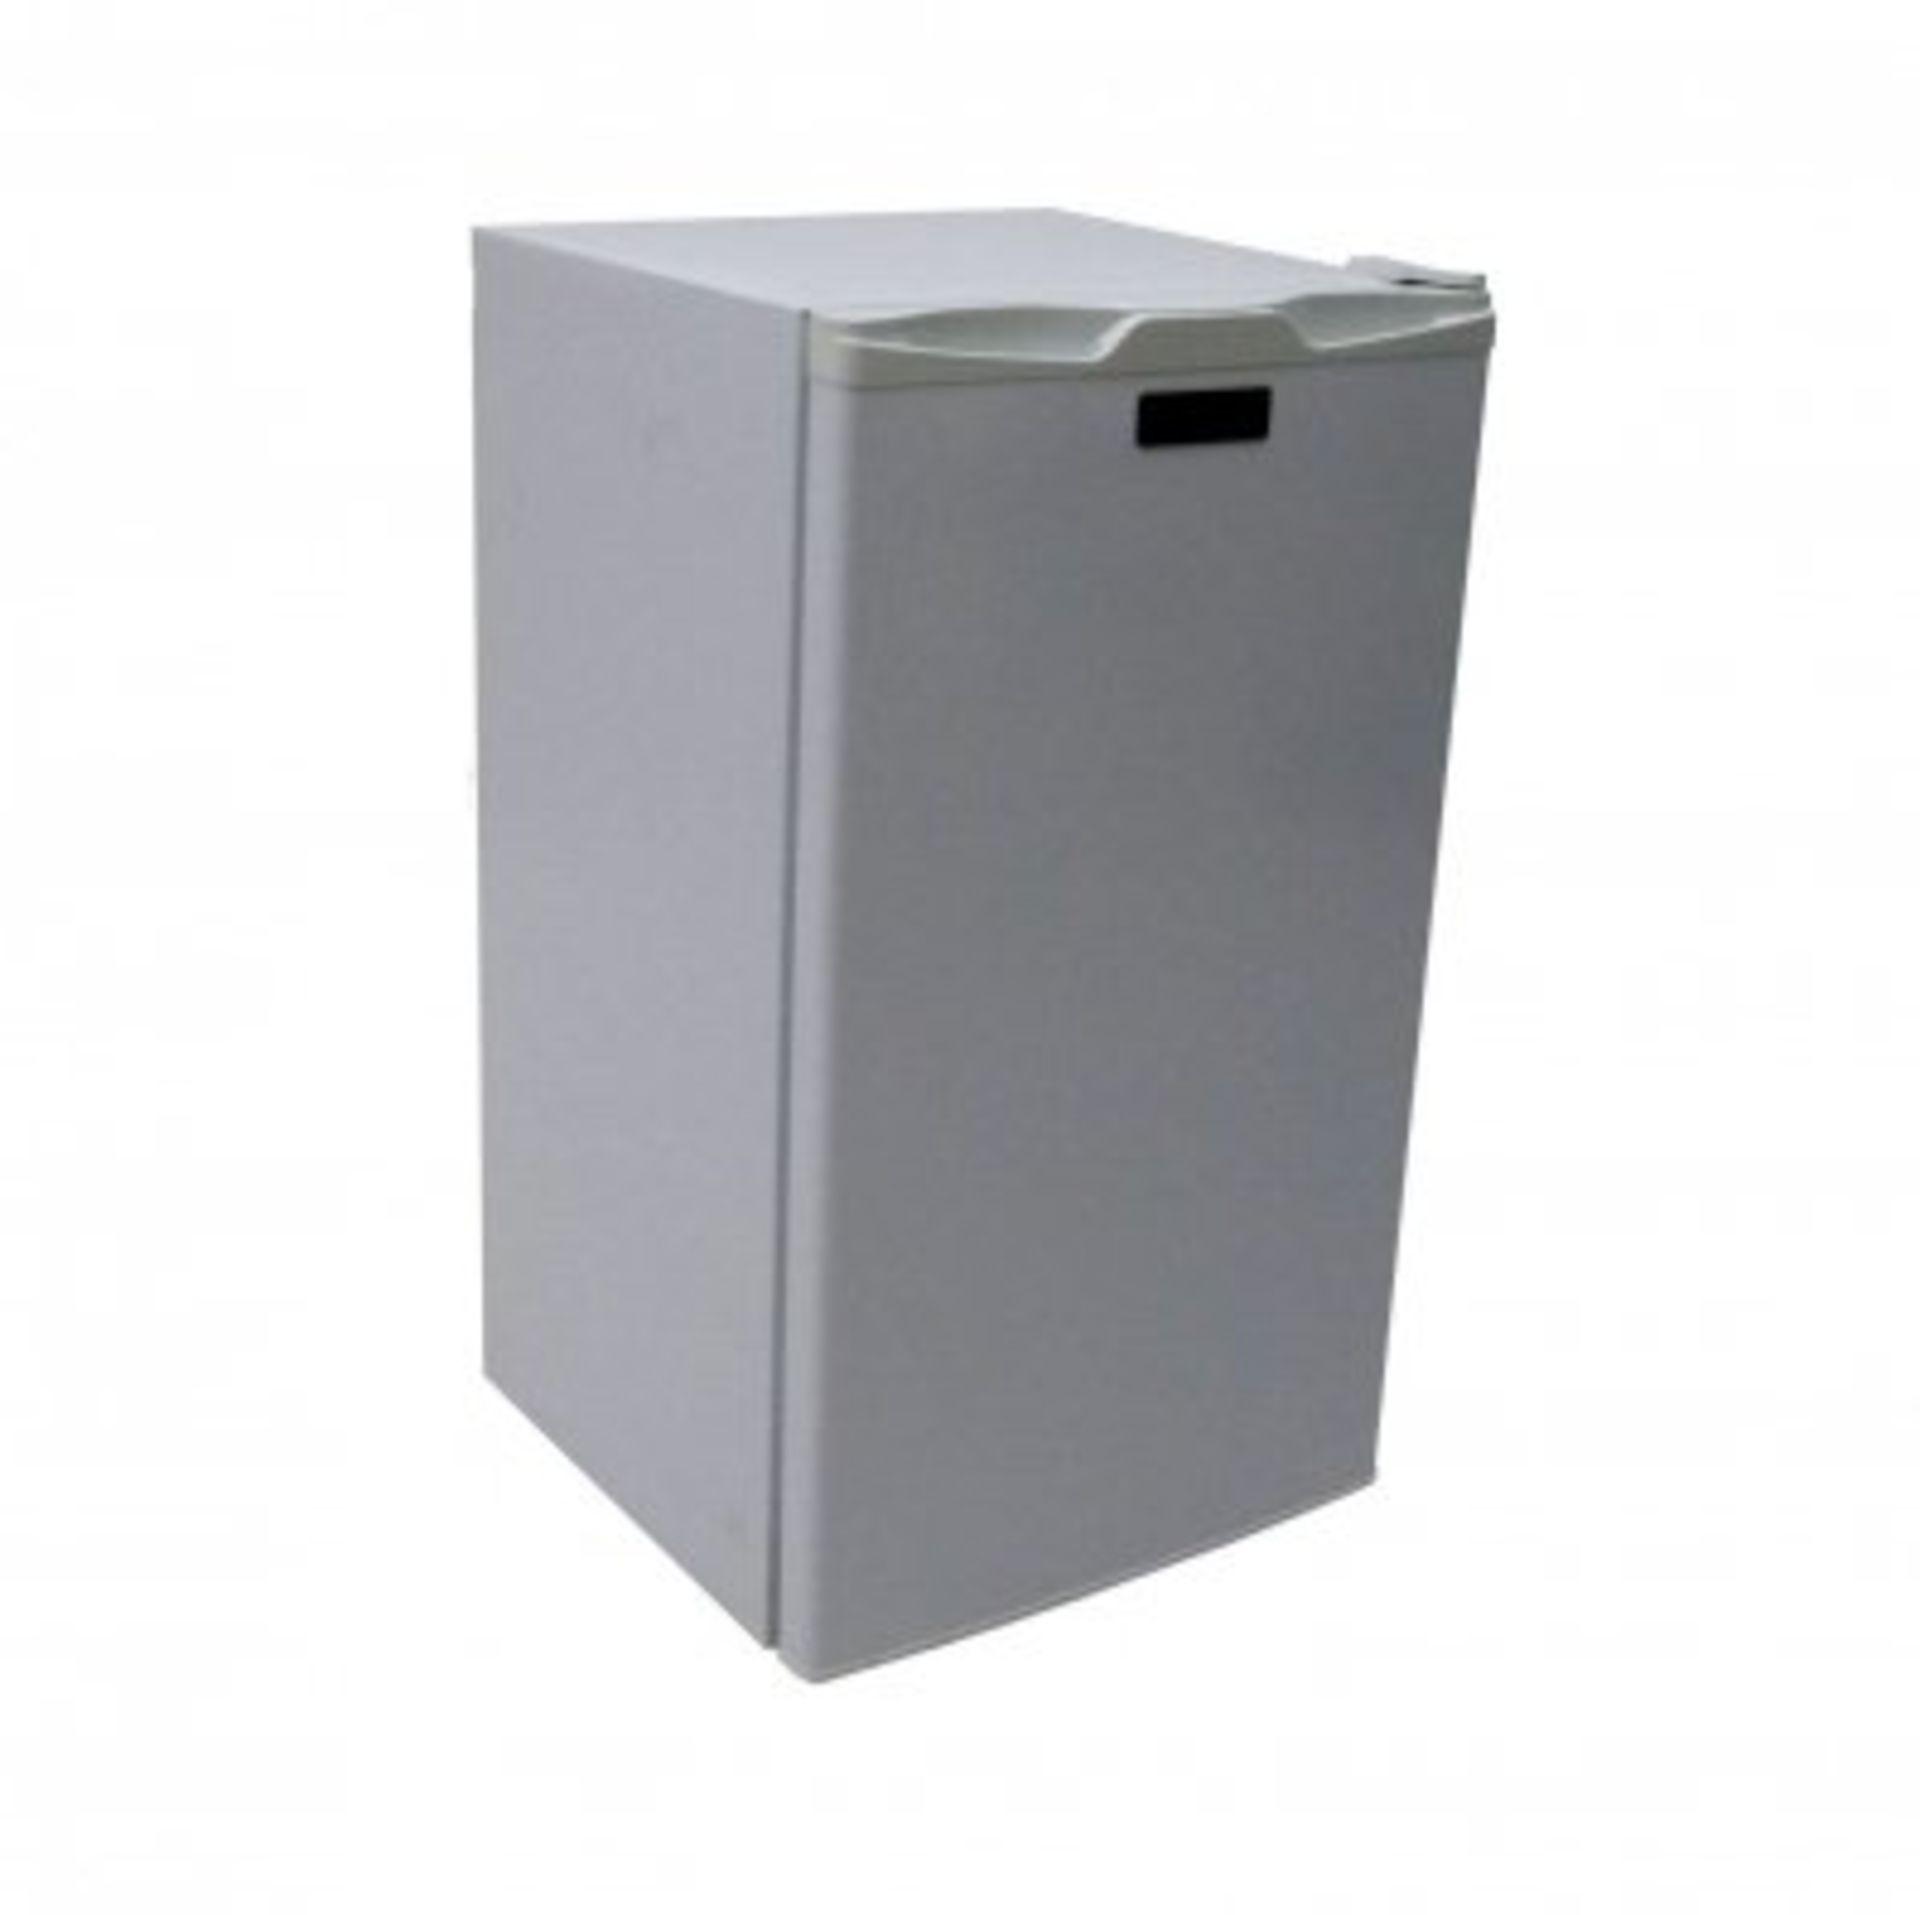 (PP505) The under counter 90L fridge offers a space saving compact design with all the top qu...